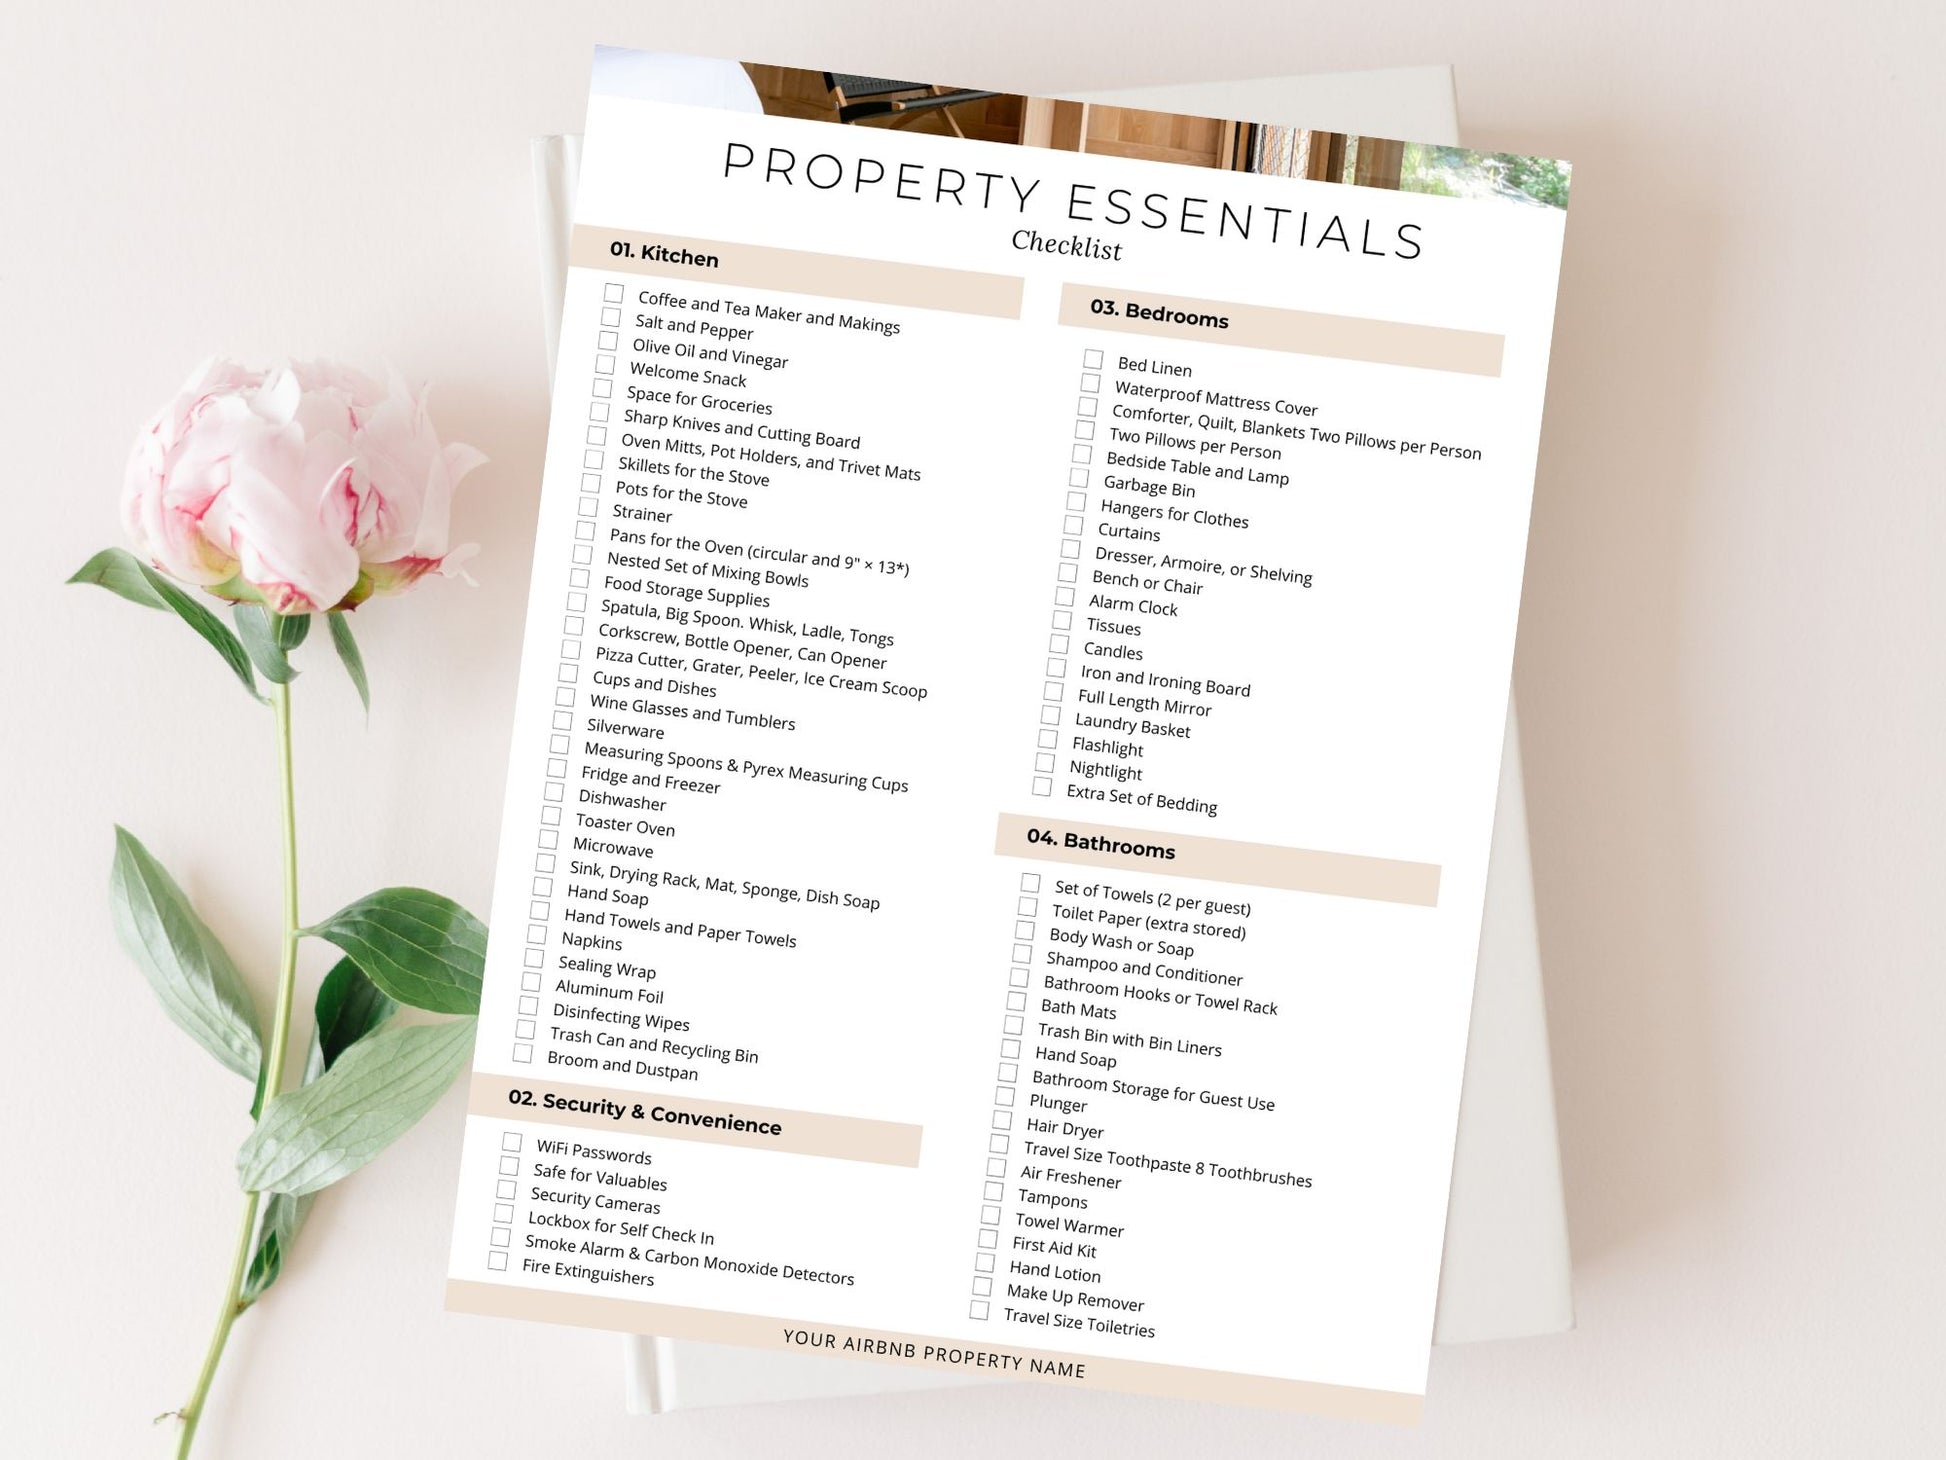 Airbnb Property Essentials Checklist - Comprehensive and editable template for ensuring essential amenities in your vacation rental property.